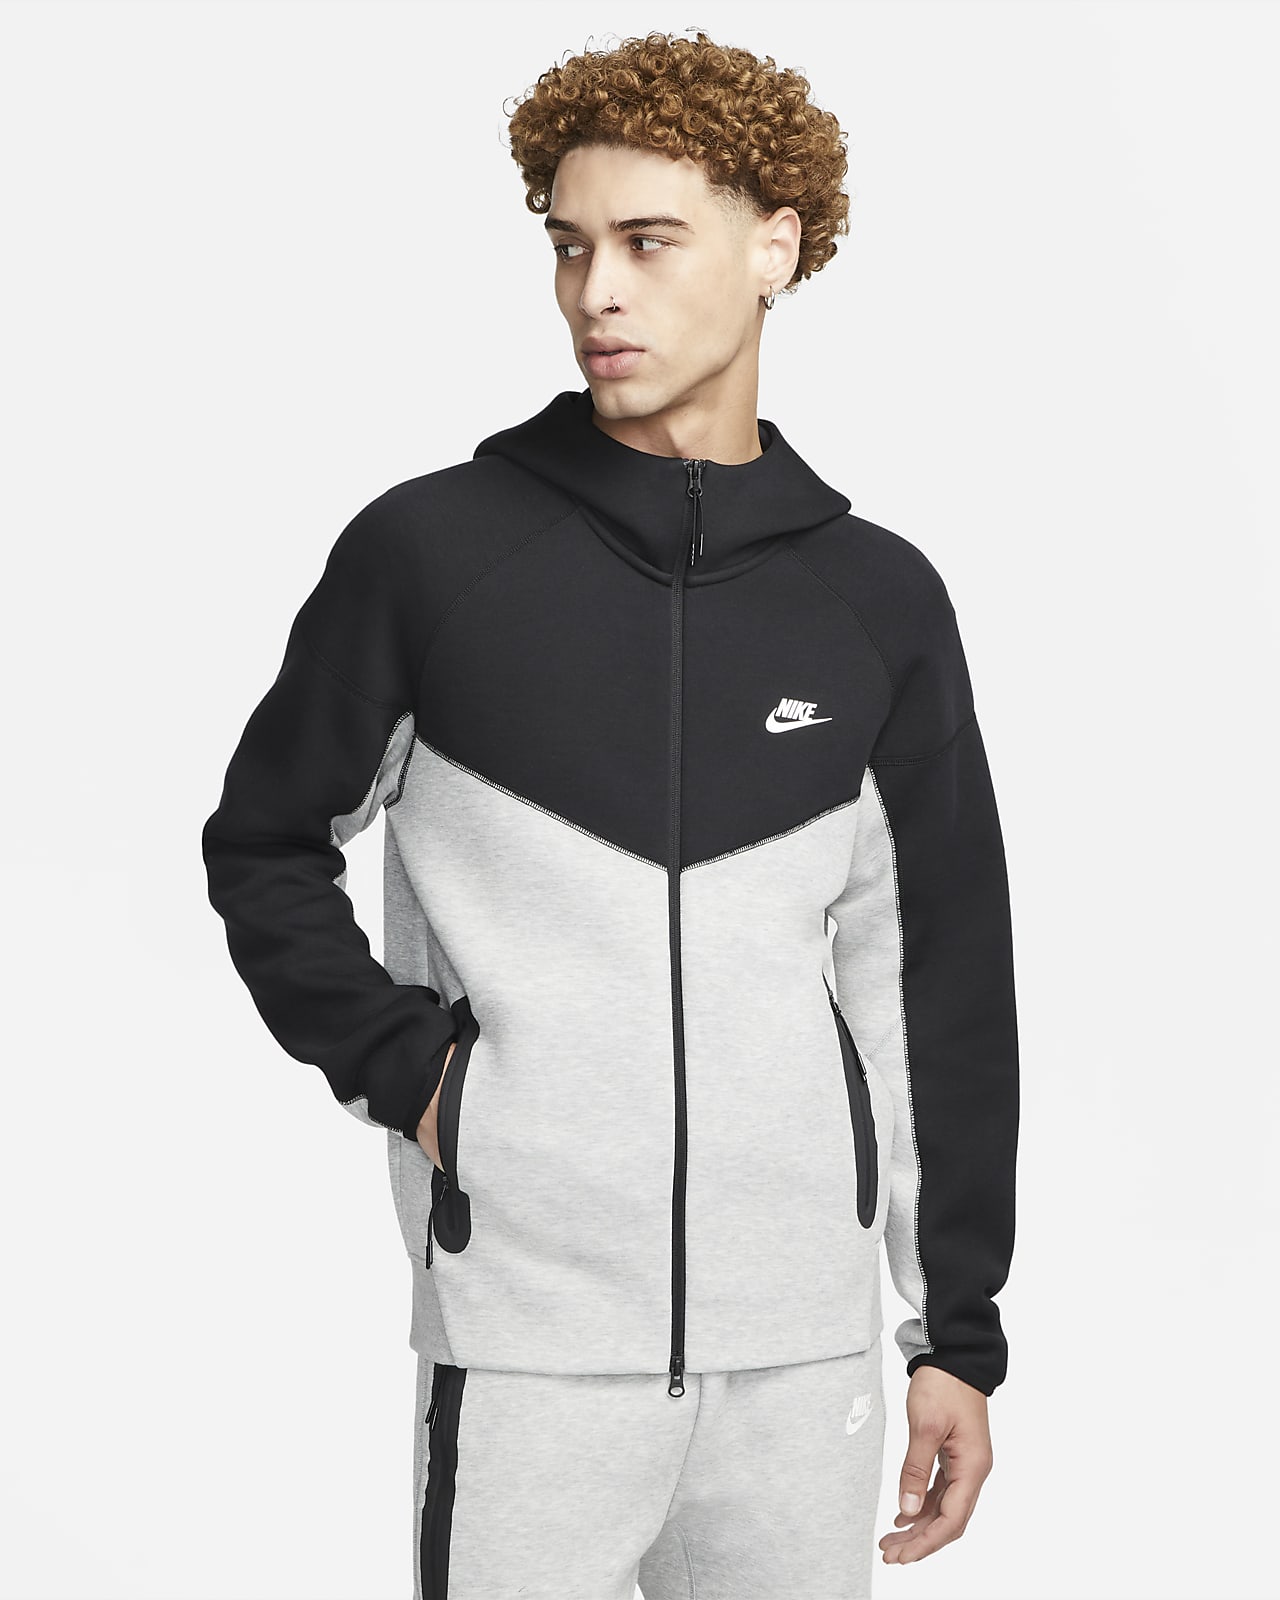 https://static.nike.com/a/images/t_PDP_1280_v1/f_auto,q_auto:eco/987285fa-3bb1-4109-bc75-081bce86cea9/sportswear-tech-fleece-windrunner-hoodie-bxQQxT.png